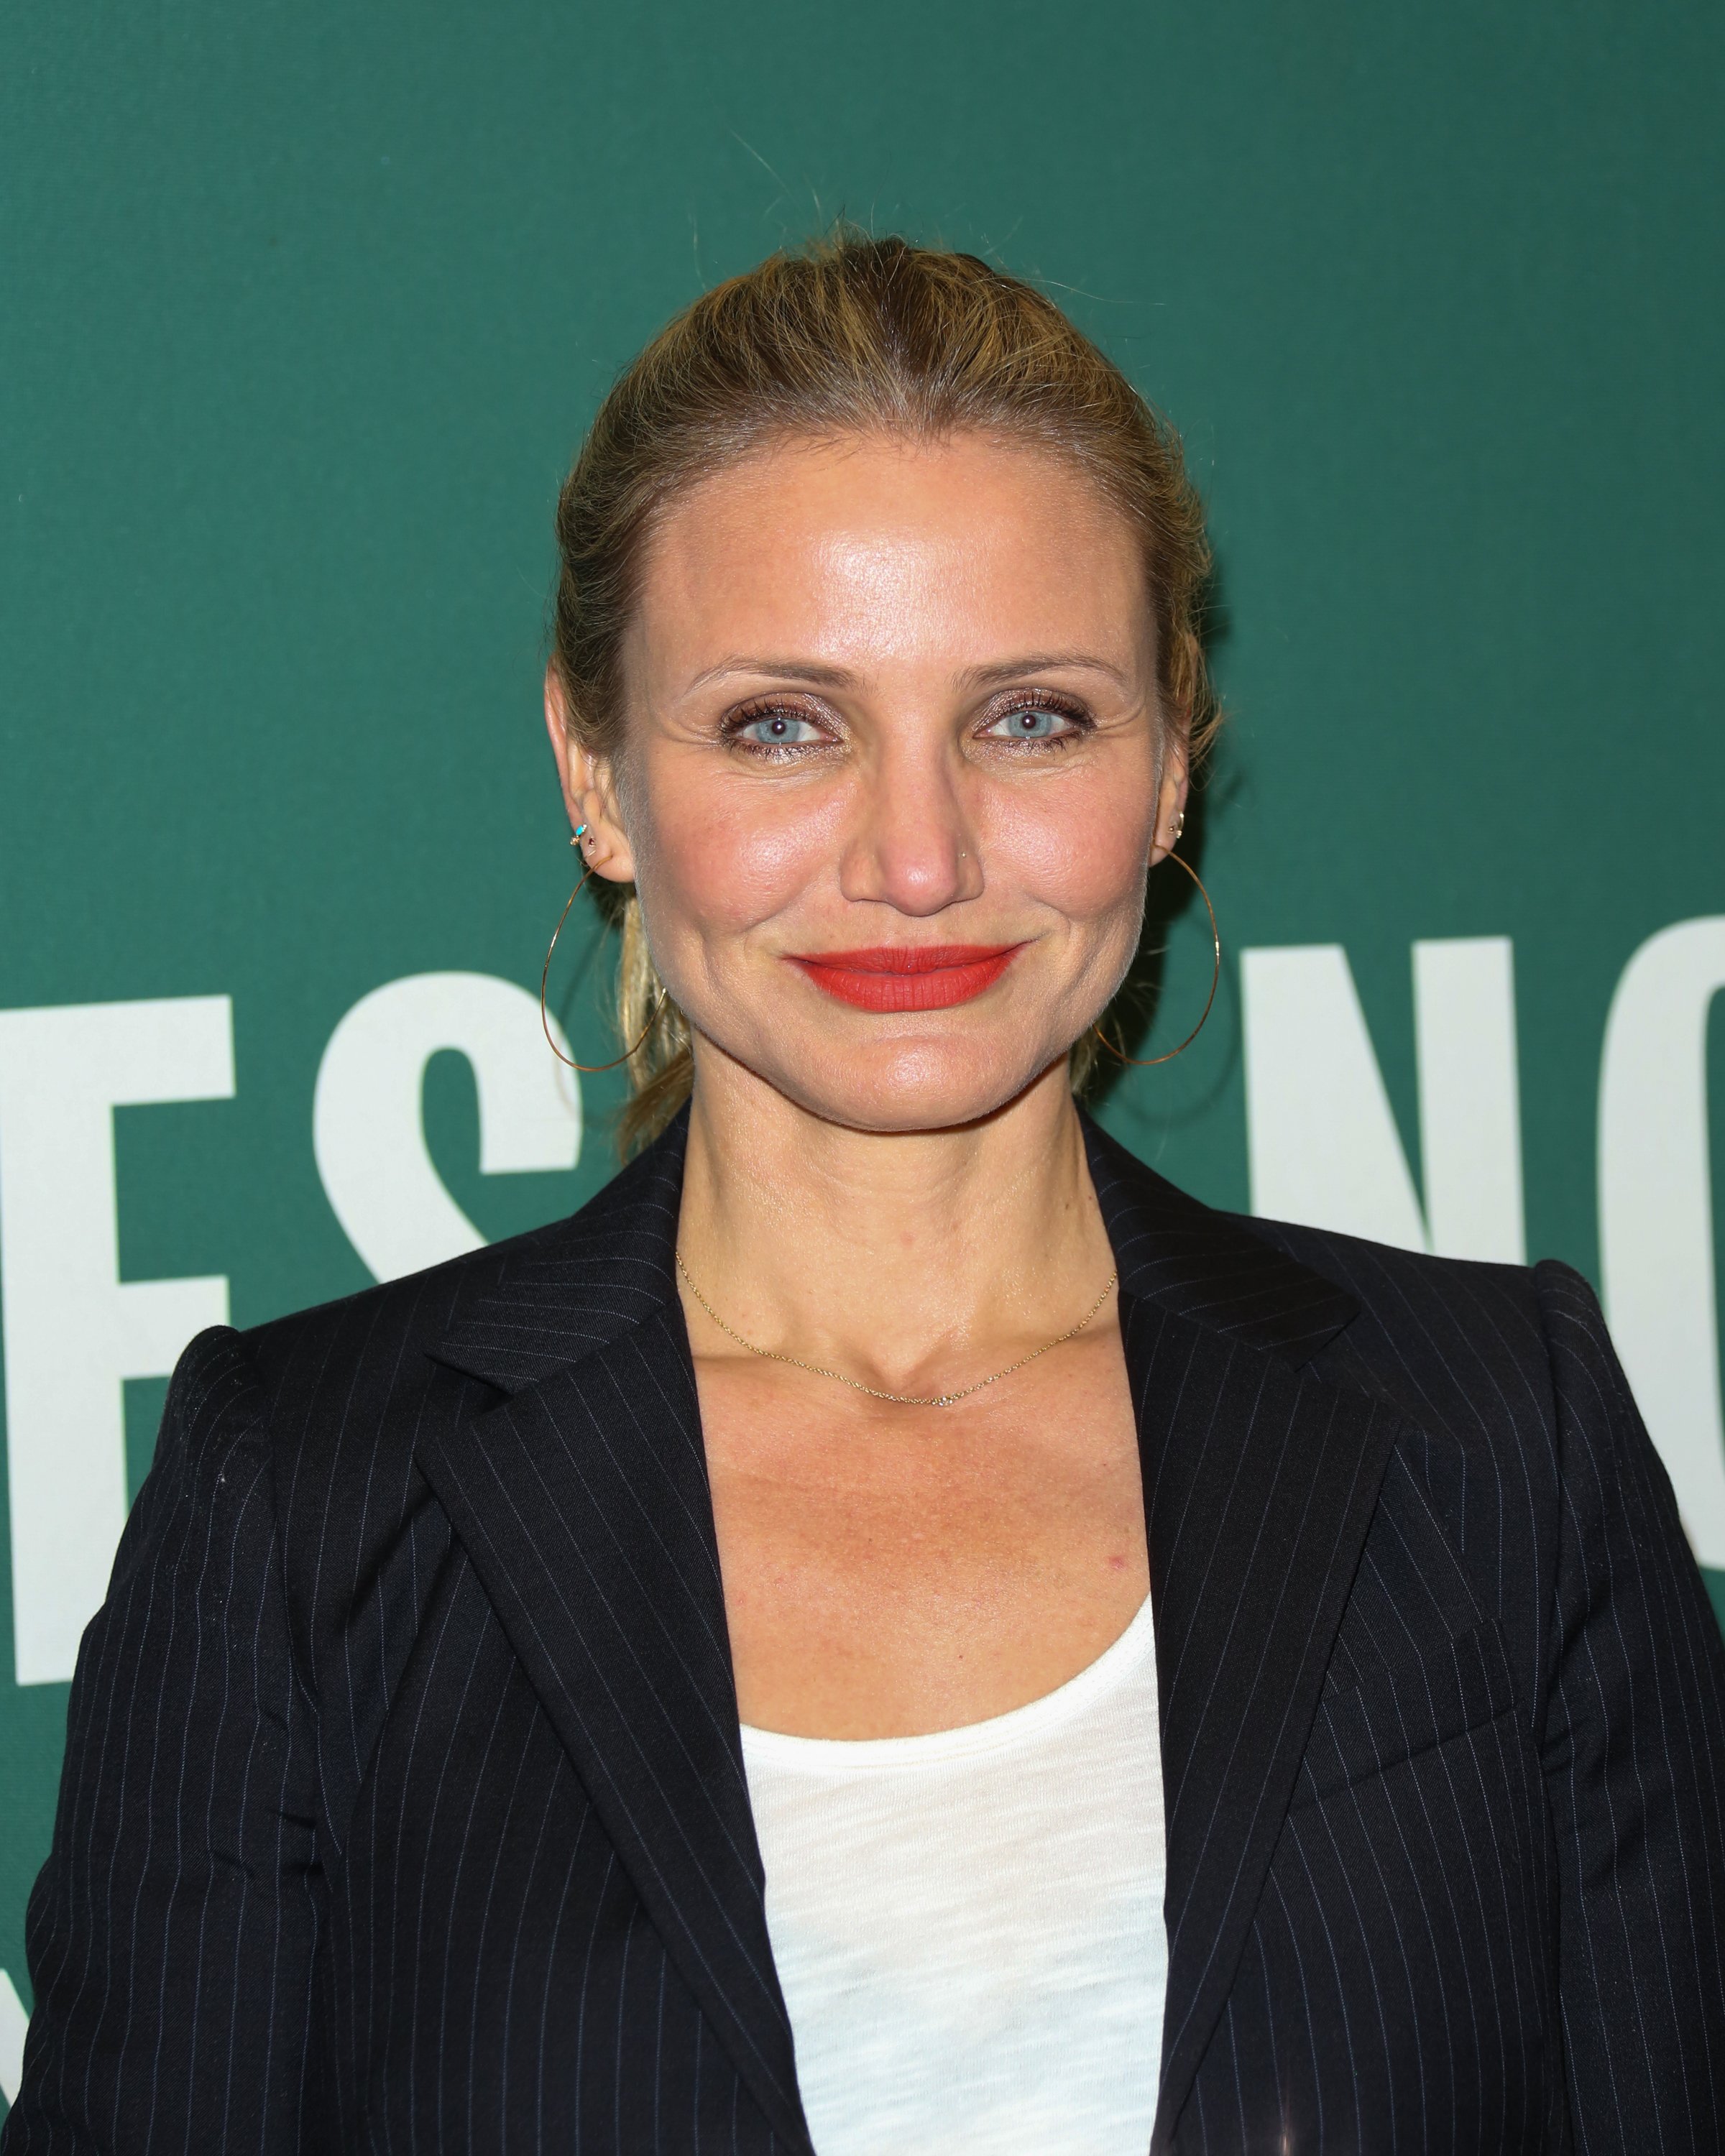 Cameron Diaz signierte Exemplare ihres neuen Buches "The Longevity Book: The Science Of Aging, The Biology Of Strength And The Privilege Of Time" bei Barnes & Noble im The Grove am 13. April 2016 in Los Angeles, Kalifornien. | Quelle: Getty Images